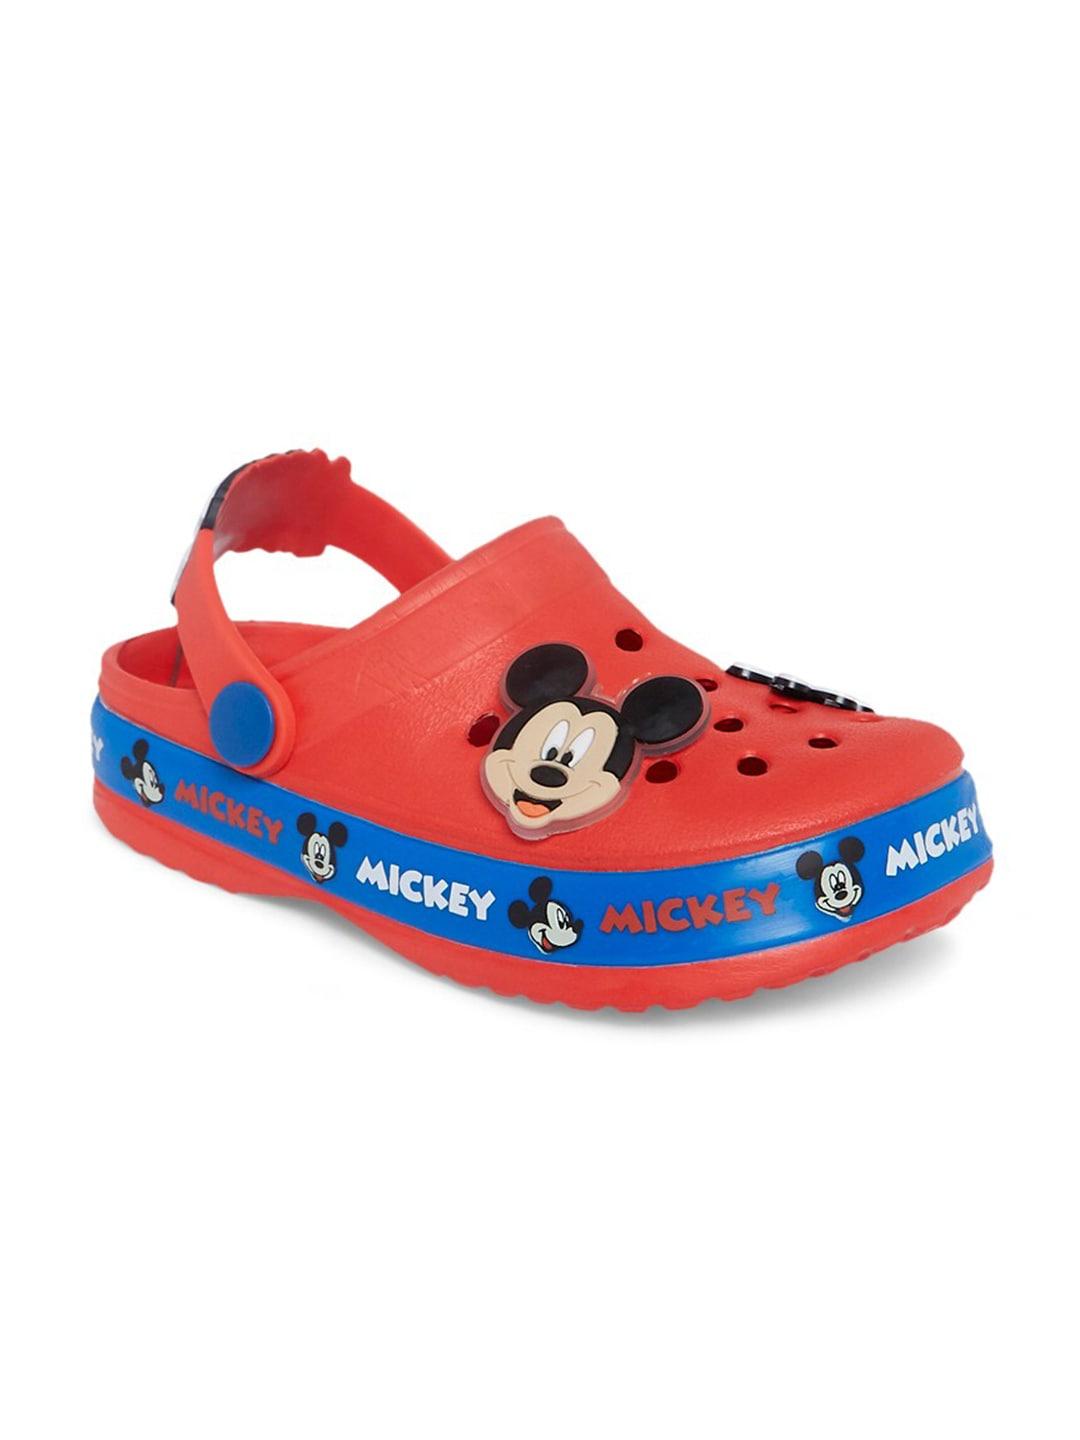 pantaloons-junior-kids-boys-red-&-black--mickey-mouse-printed-rubber-clogs